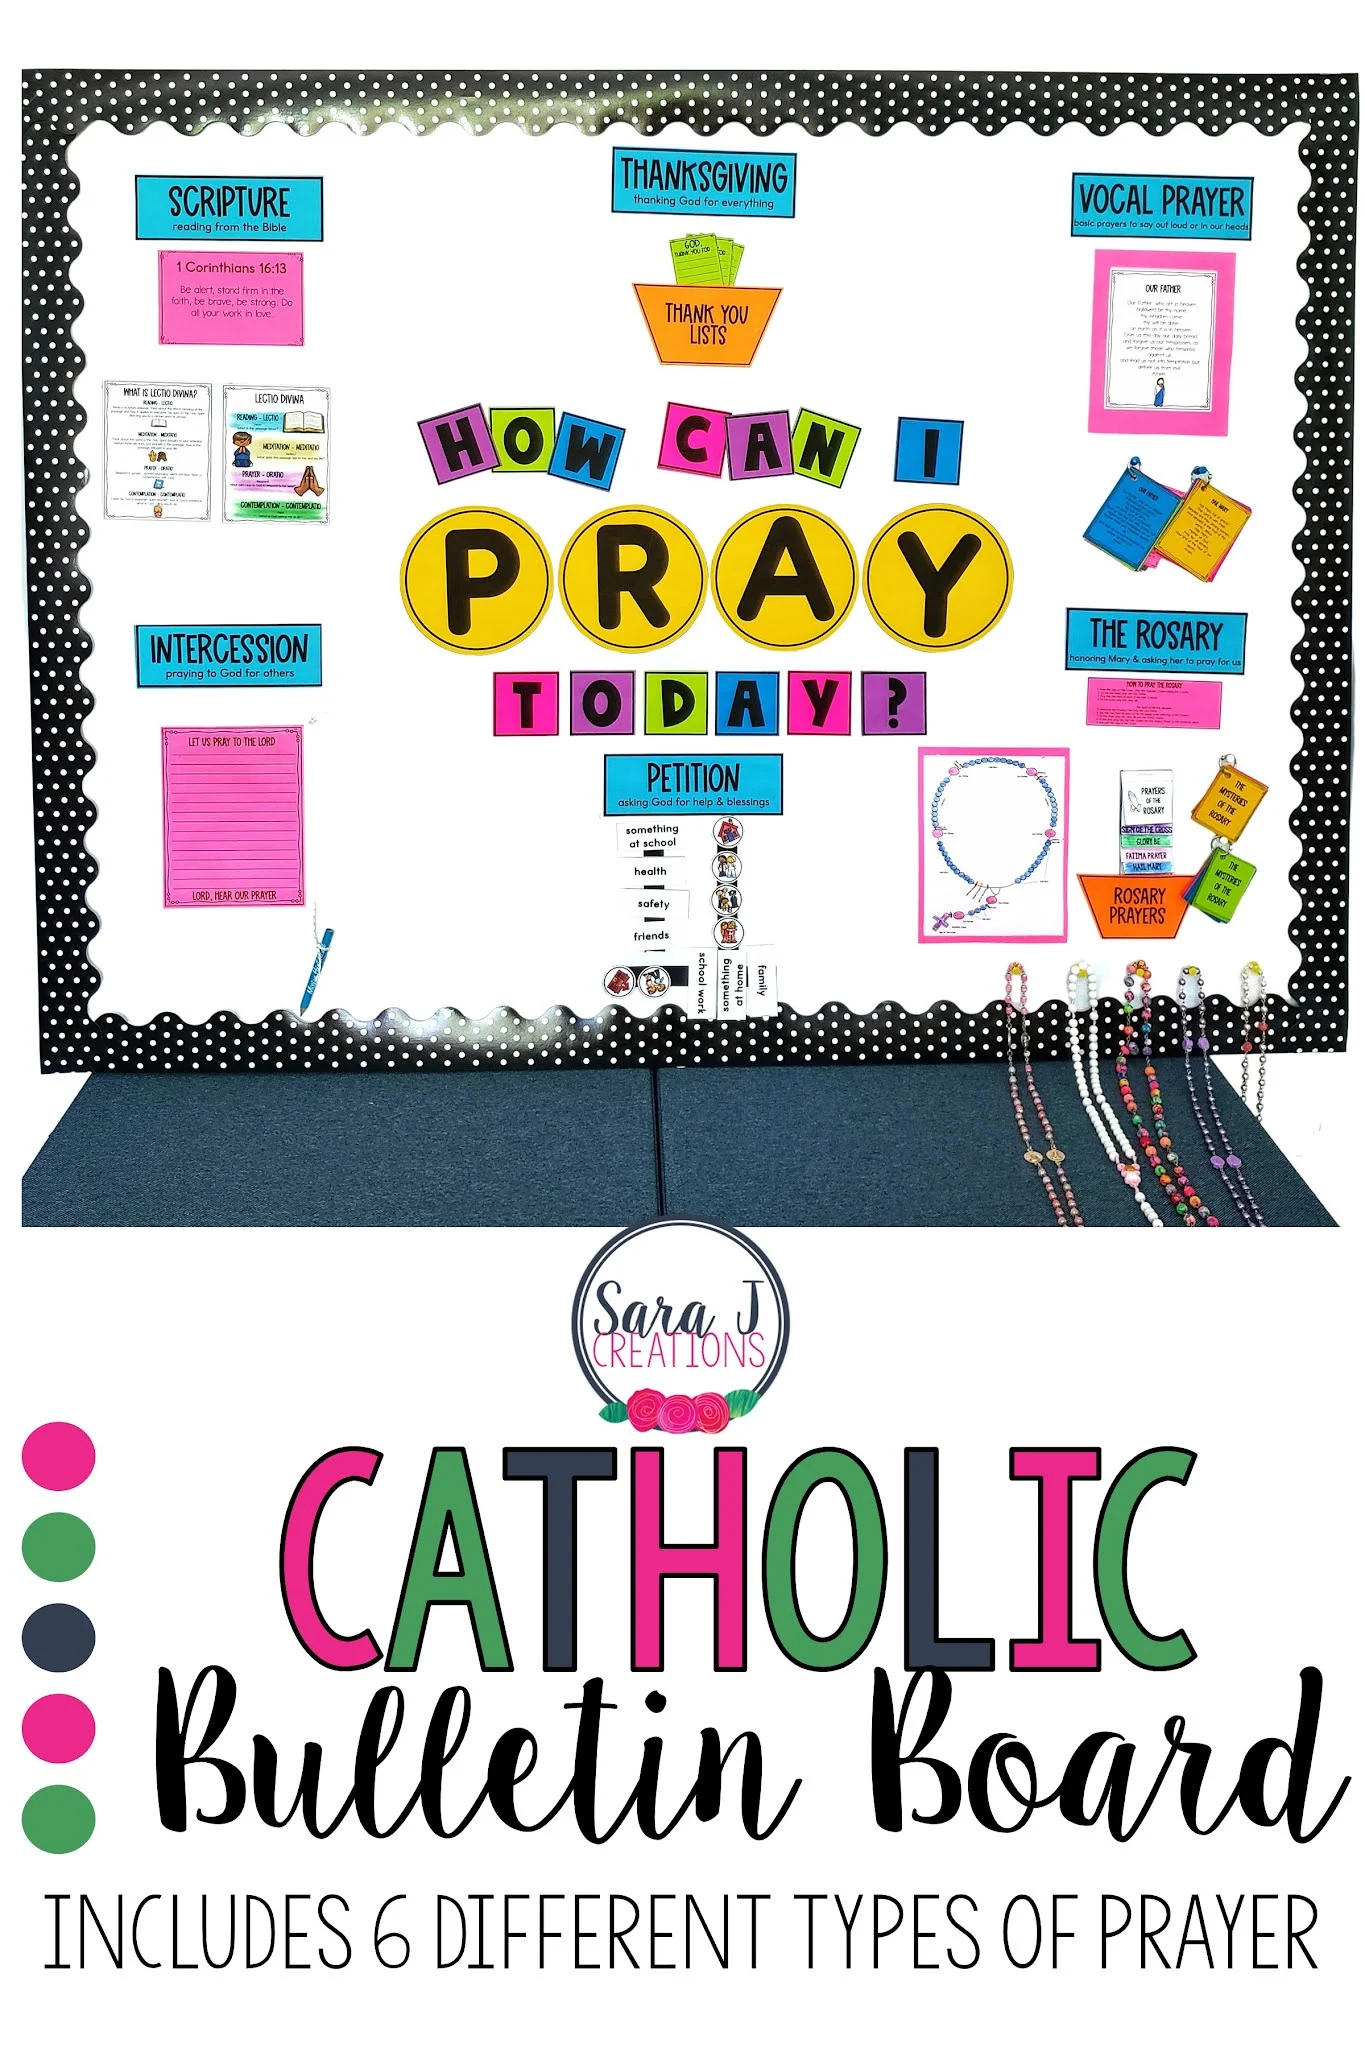 Teach your students 6 different ways to pray with this Catholic Prayers Bulletin Board. The perfect interactive bulletin board for Catholic classrooms and Sunday school rooms. Teach about petition, intercession, the Rosary, scripture, thanksgiving and vocal prayer.